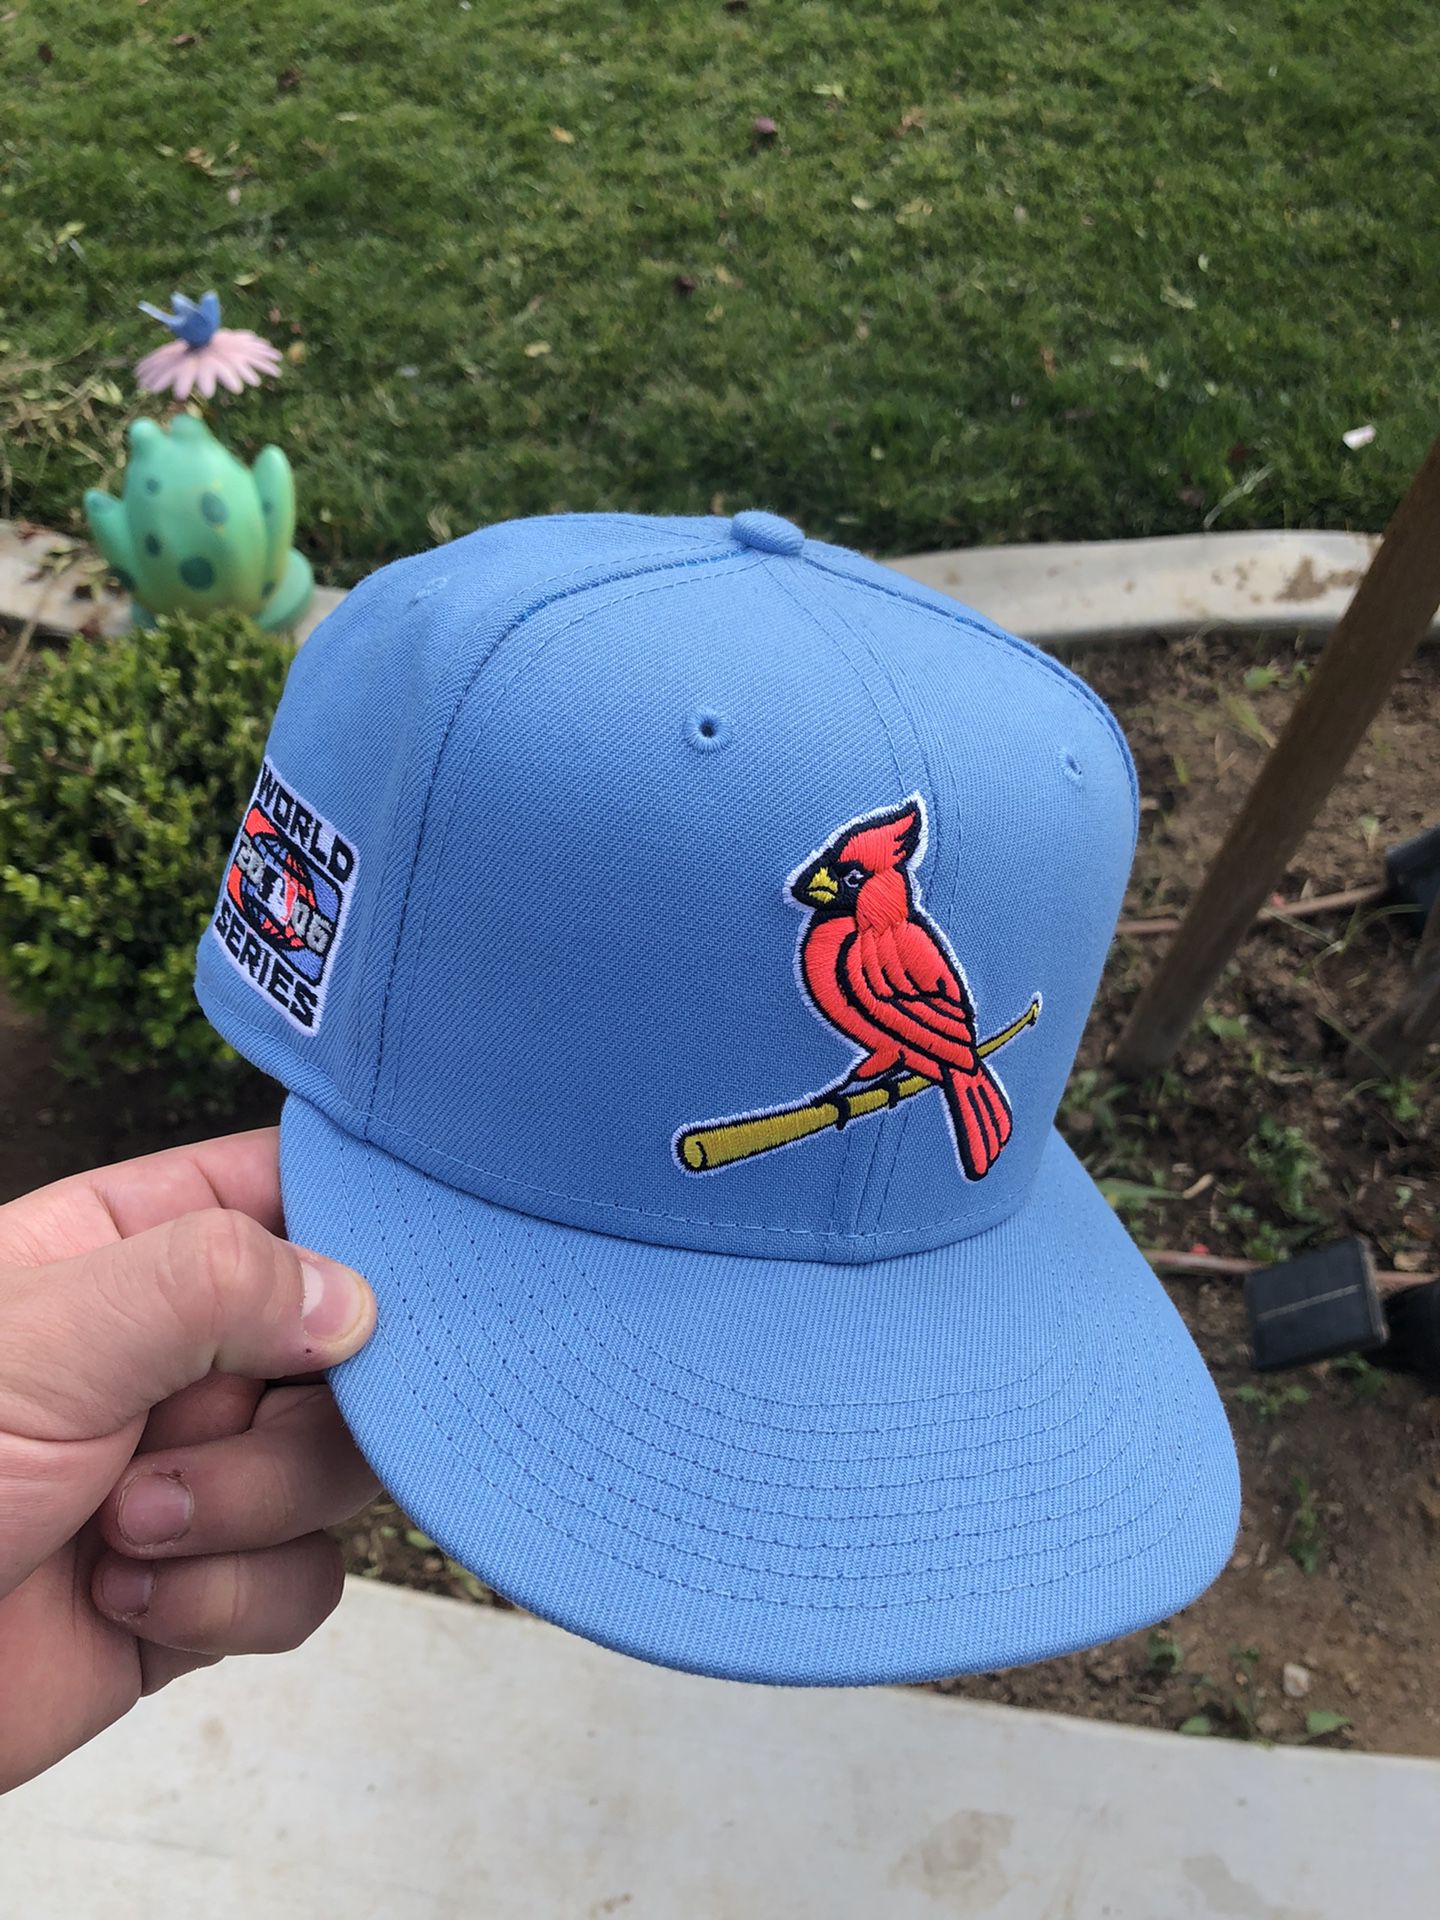 St. Louis Cardinals Hat, Size 7 3/8 for Sale in Riverside, CA - OfferUp